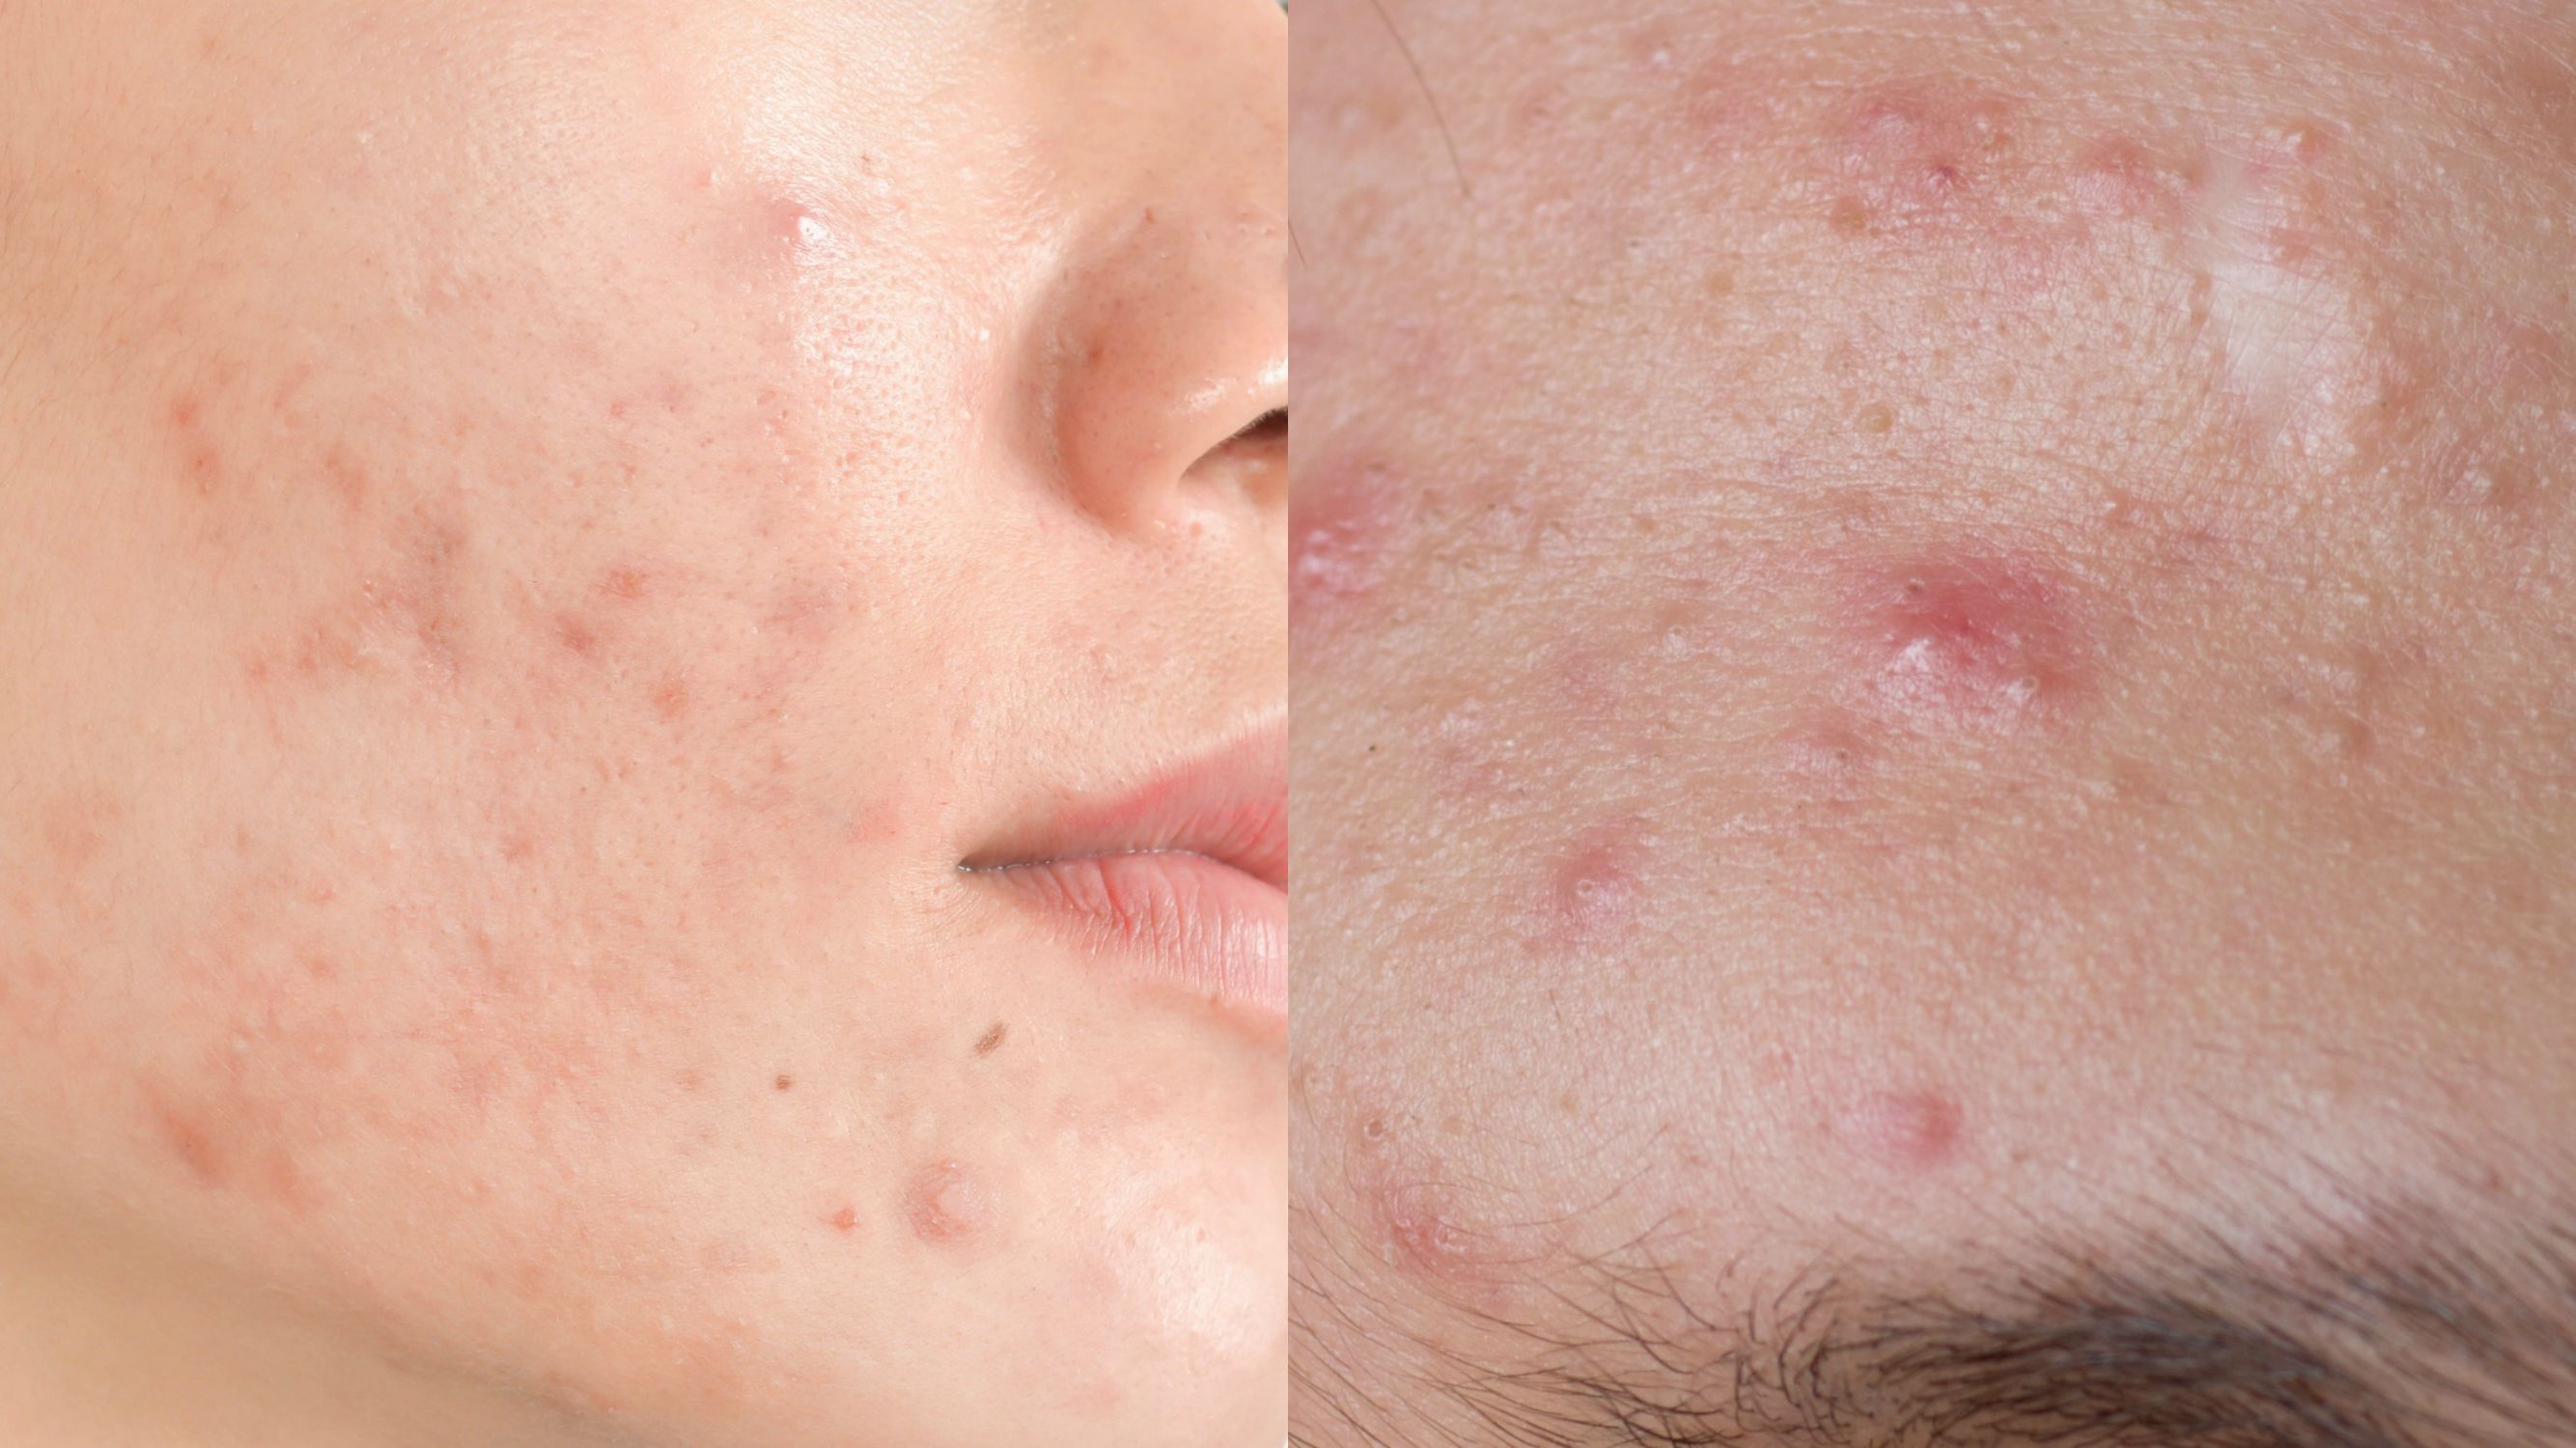 Acne Pustules on Face: How to Get Rid of Pustules?